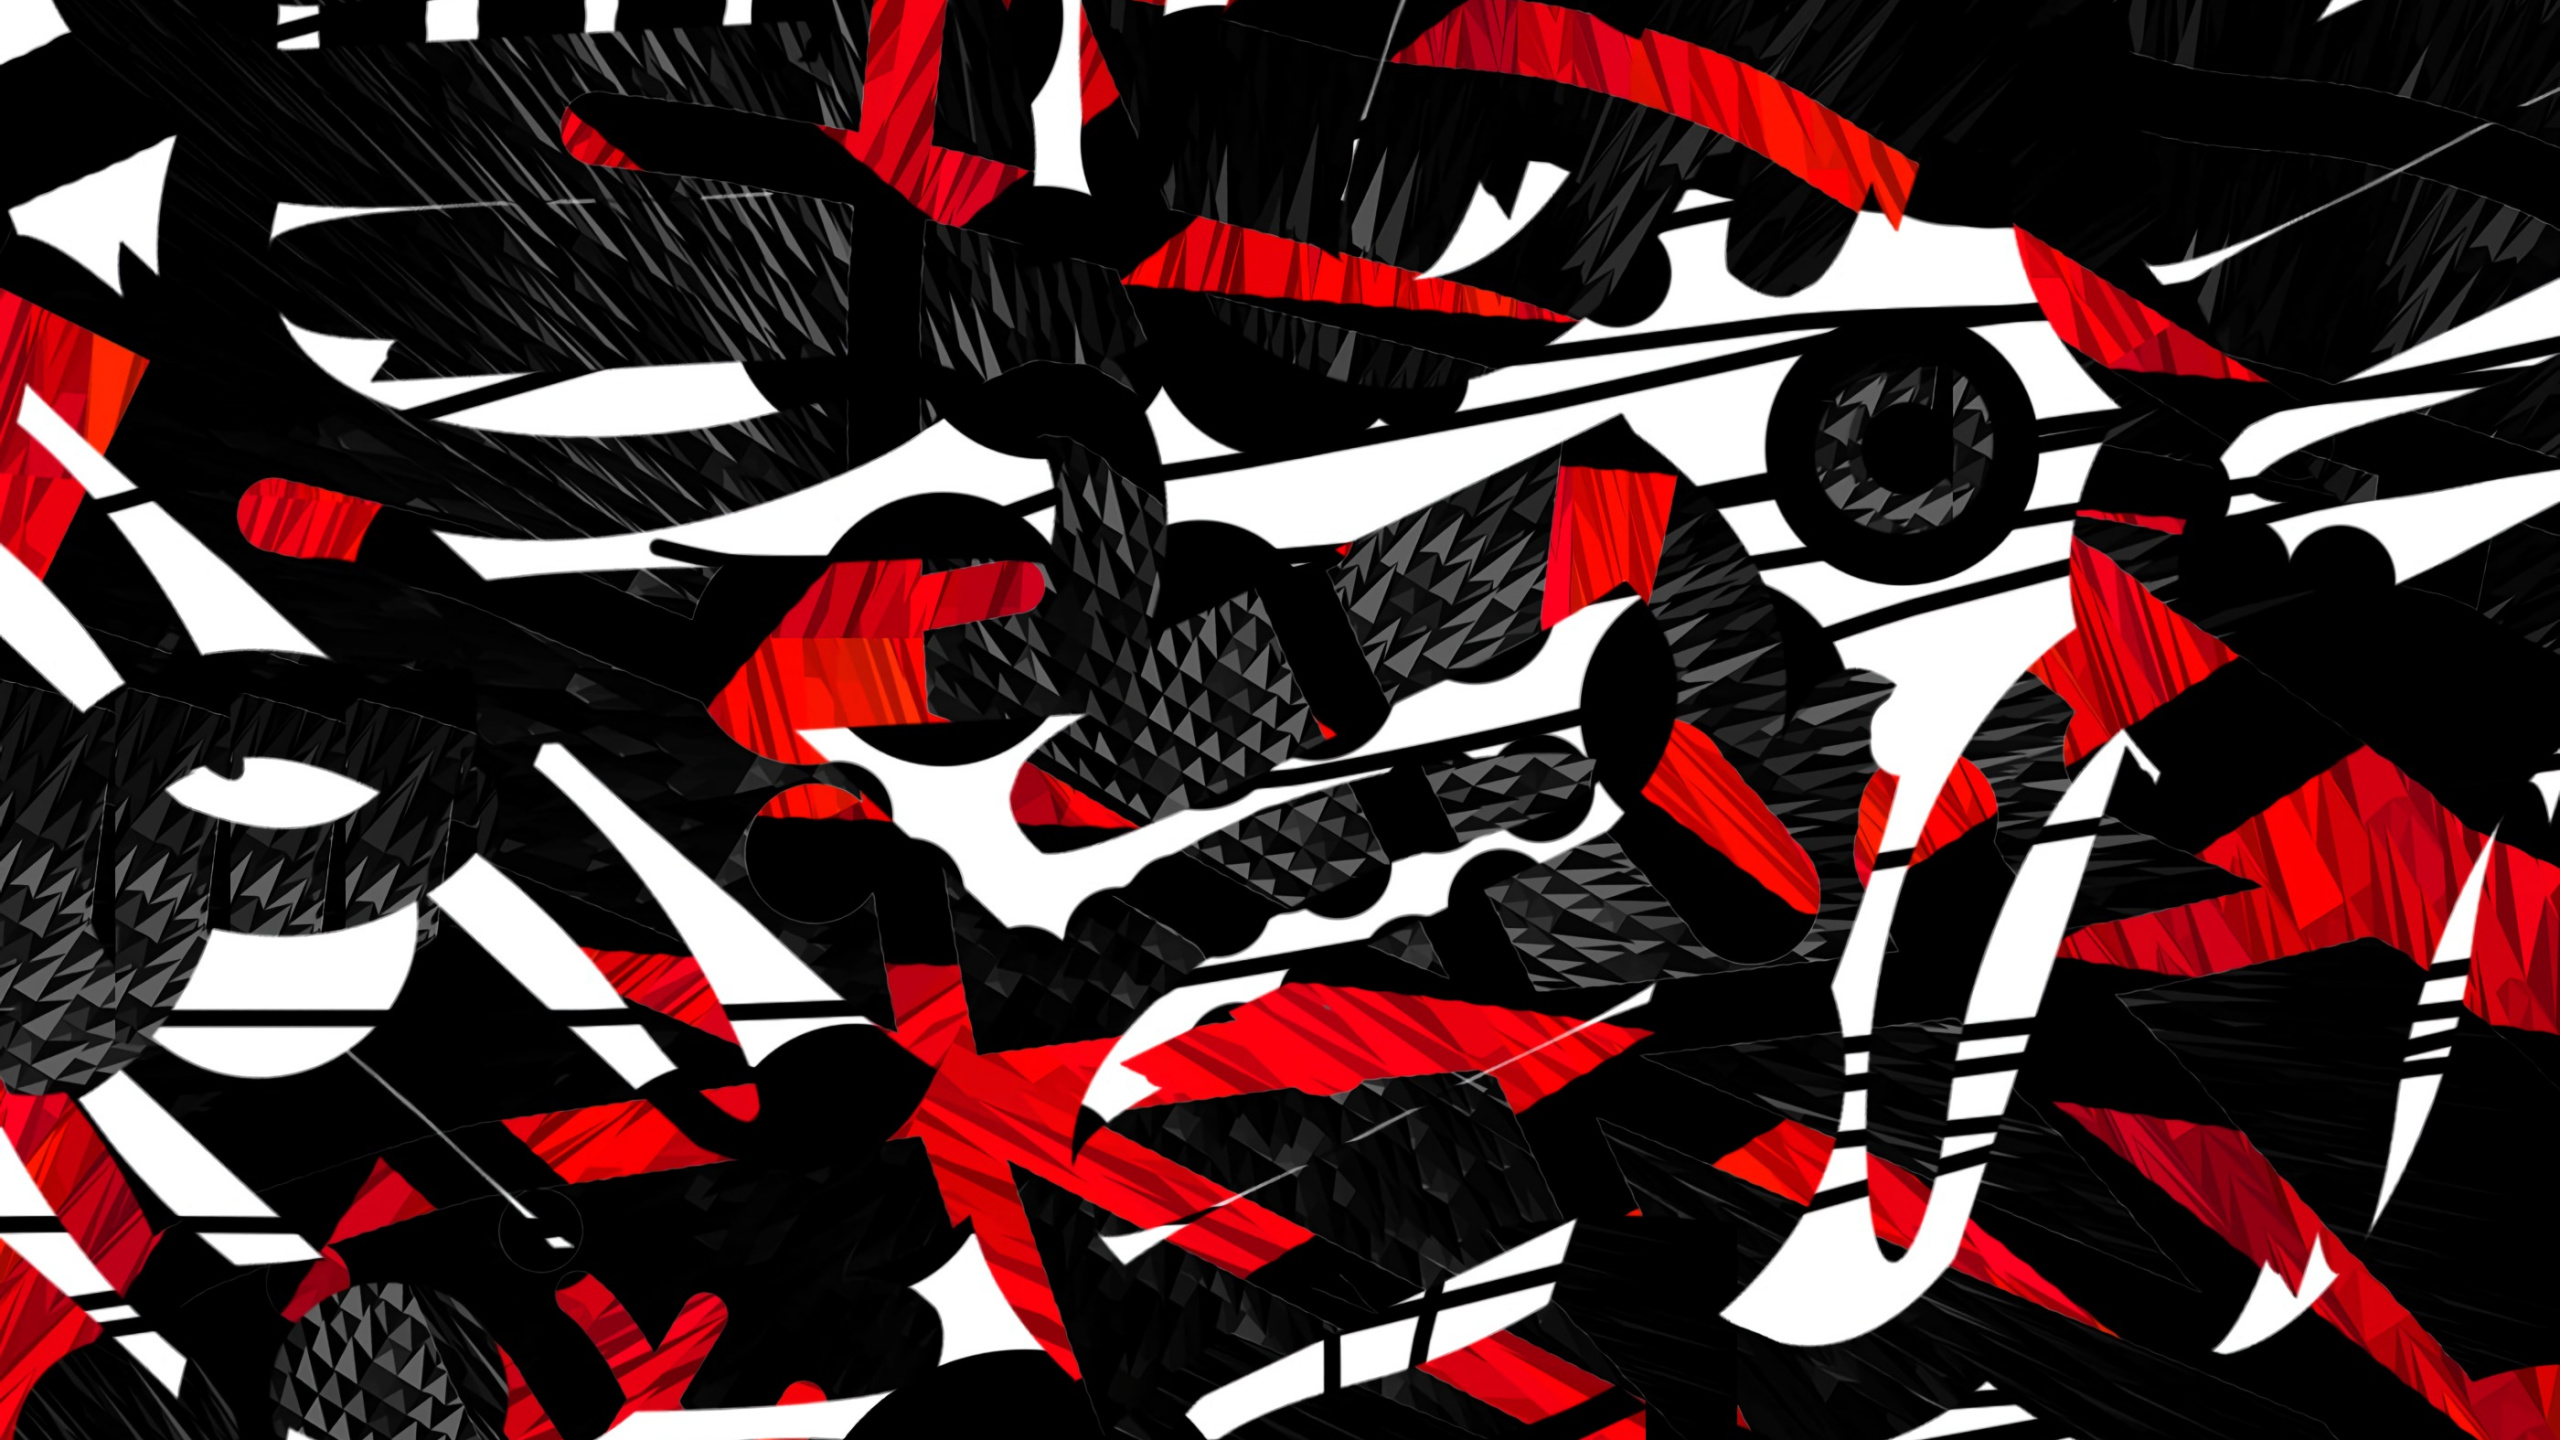 Black White and Red Abstract Painting. Wallpaper in 2560x1440 Resolution